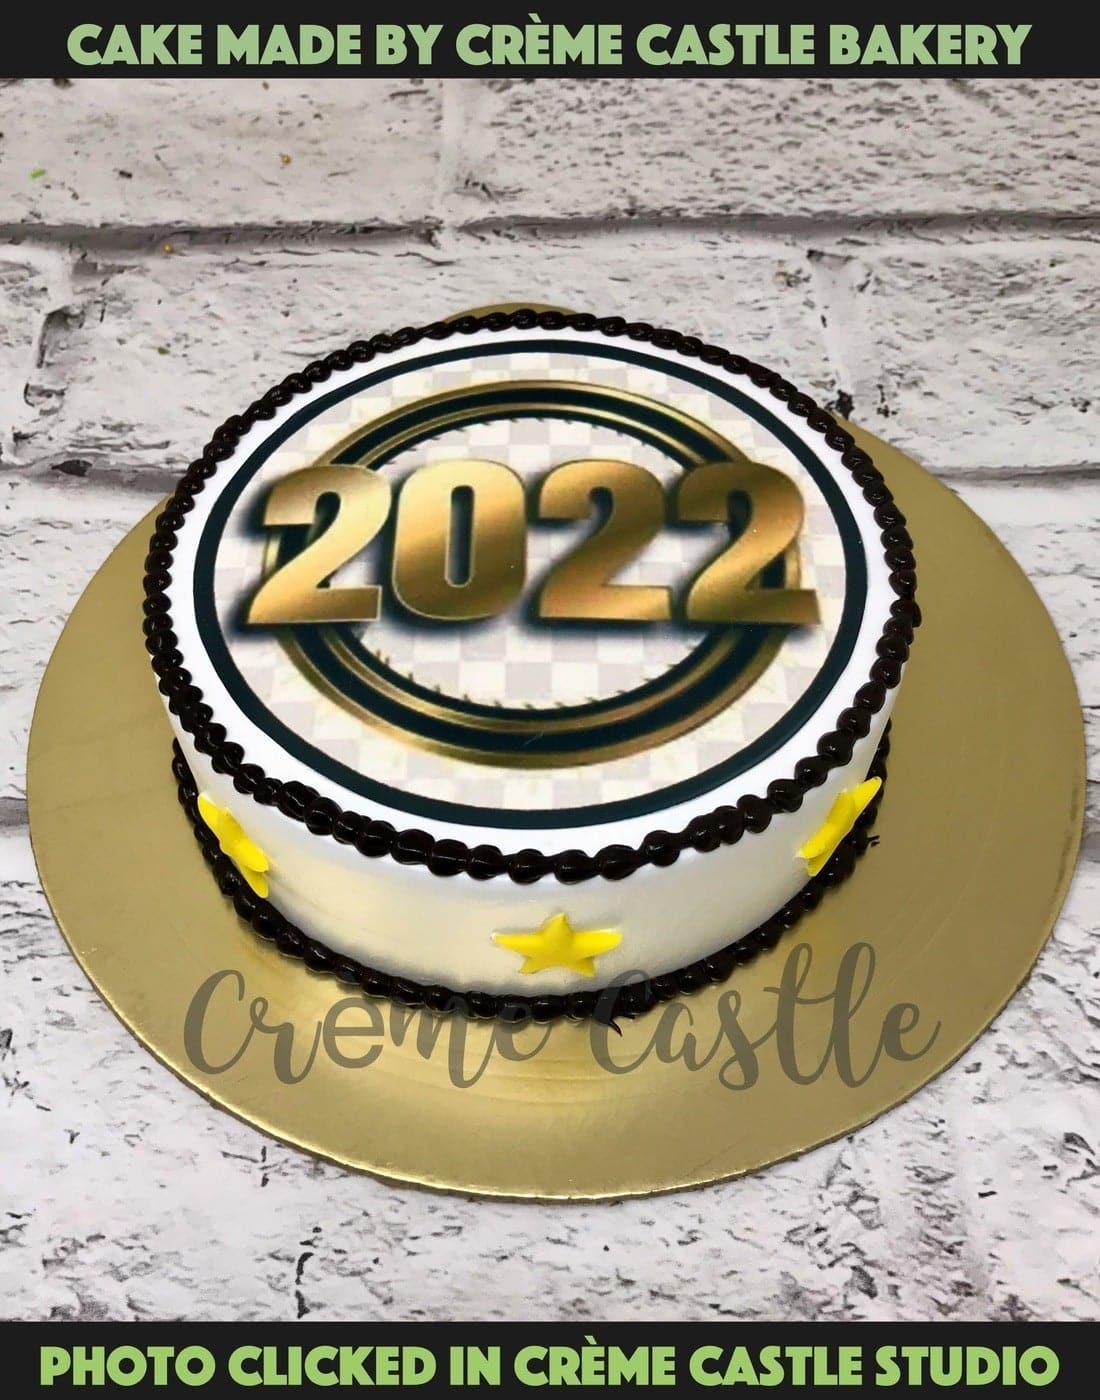 2022 Label New Years Cake